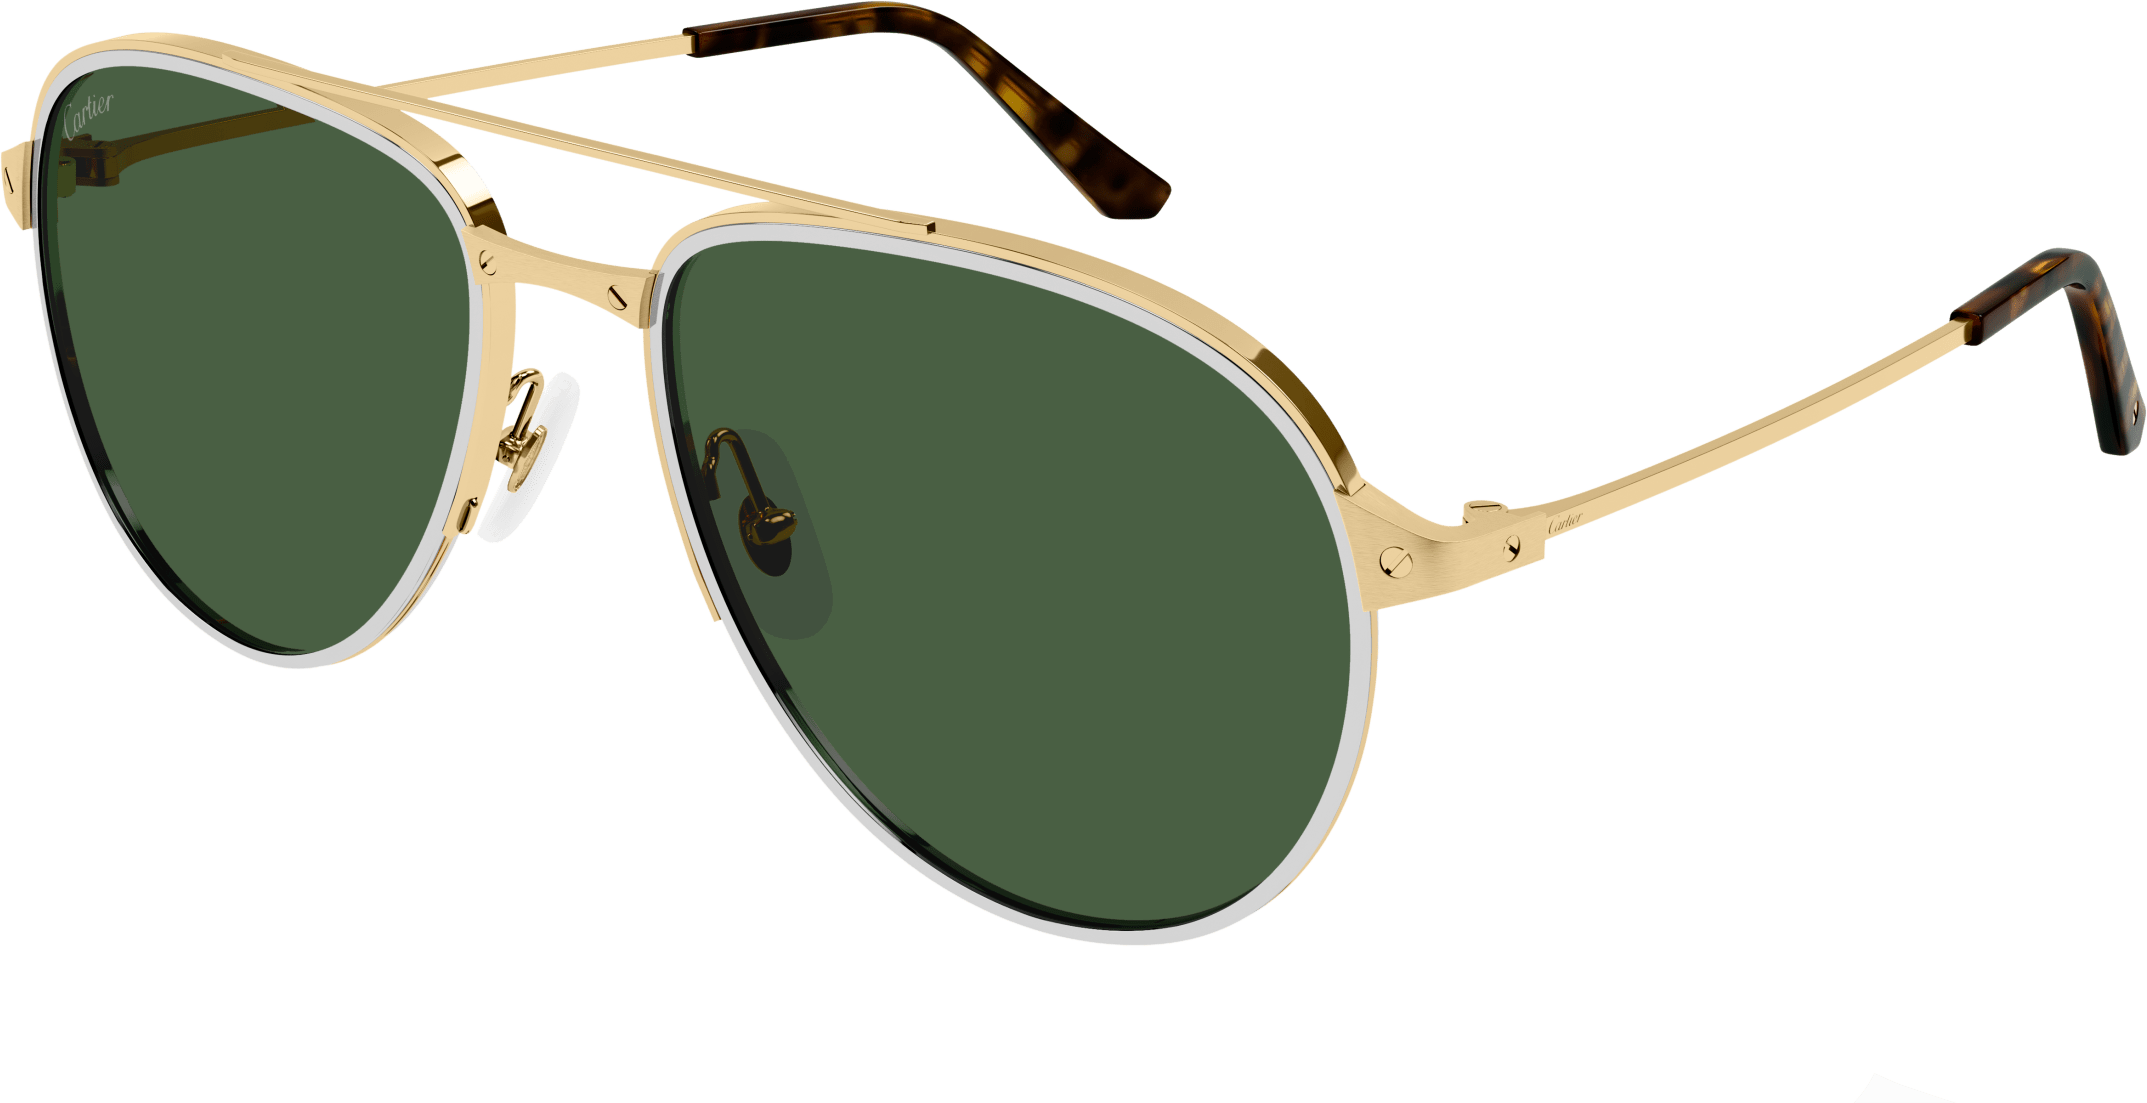 Color_CT0325S-006 - GOLD - GREEN - AR (ANTI REFLECTIVE) - POLARIZED